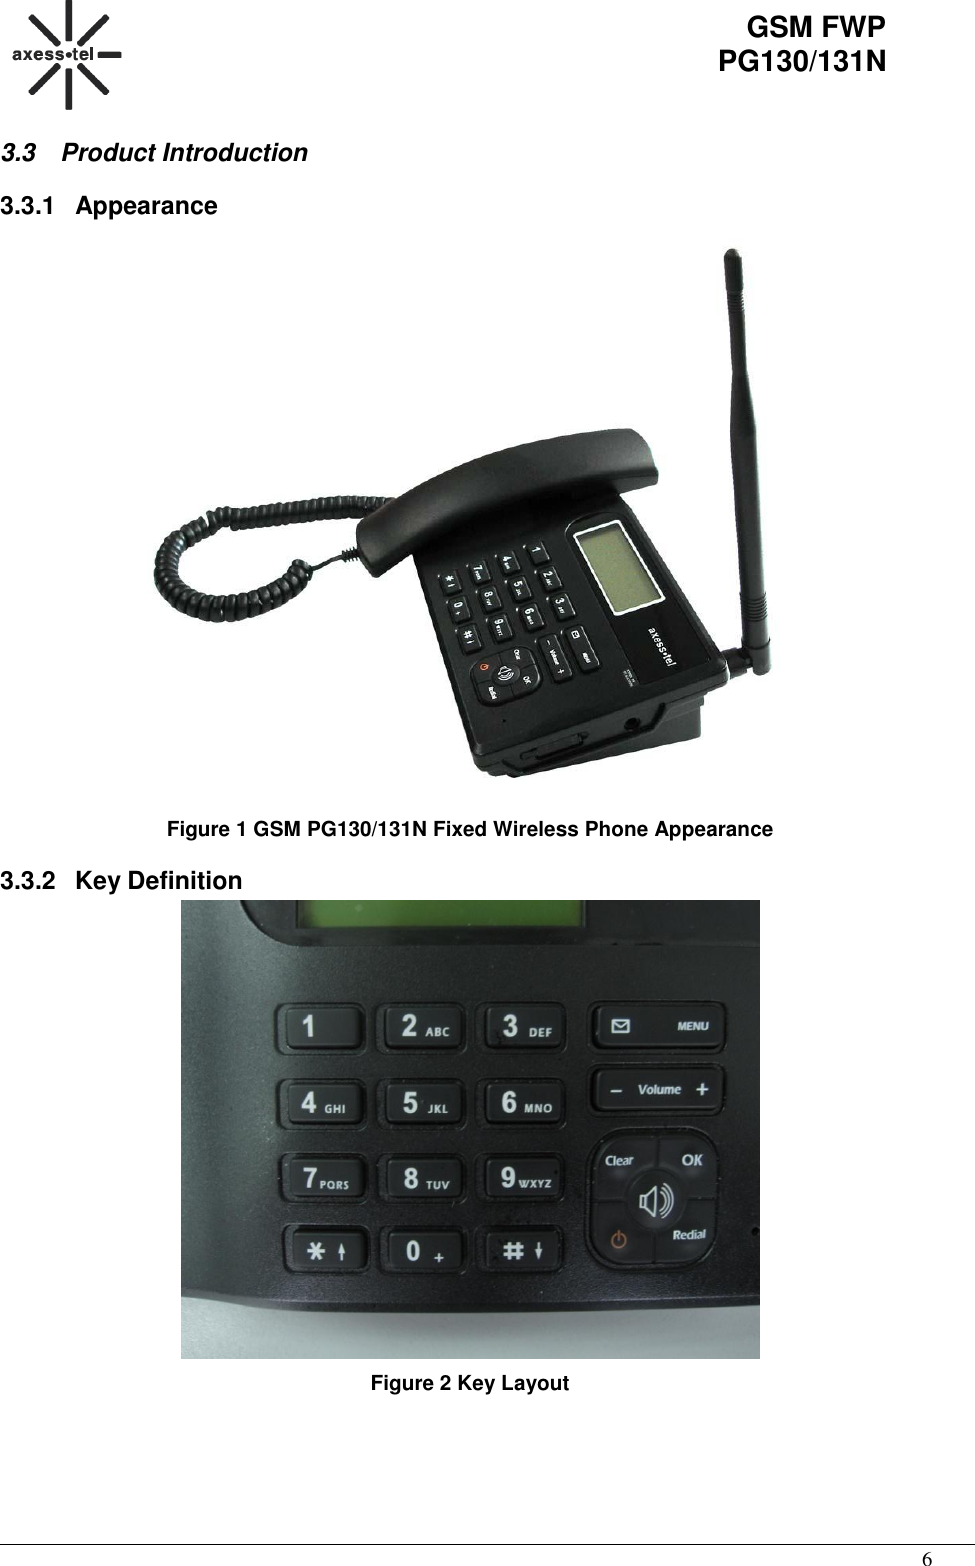                                                                                                     6 GSM FWP PG130/131N 3.3  Product Introduction 3.3.1  Appearance  Figure 1 GSM PG130/131N Fixed Wireless Phone Appearance 3.3.2  Key Definition  Figure 2 Key Layout     